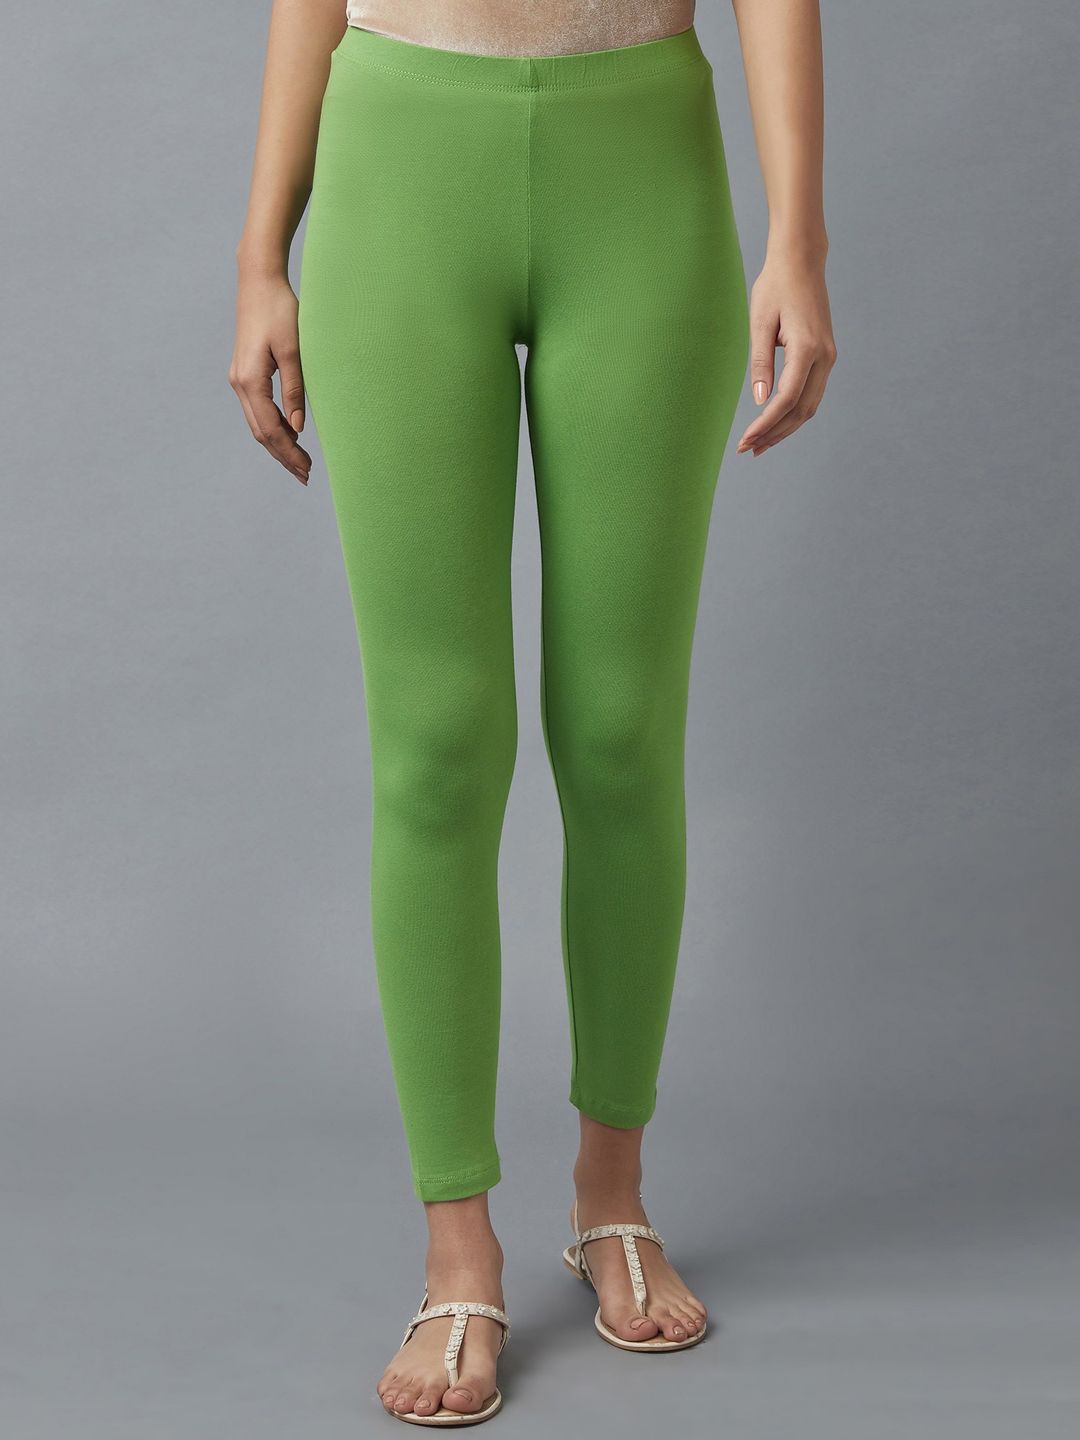 elleven Women Green Solid Ankle Length Leggings Price in India